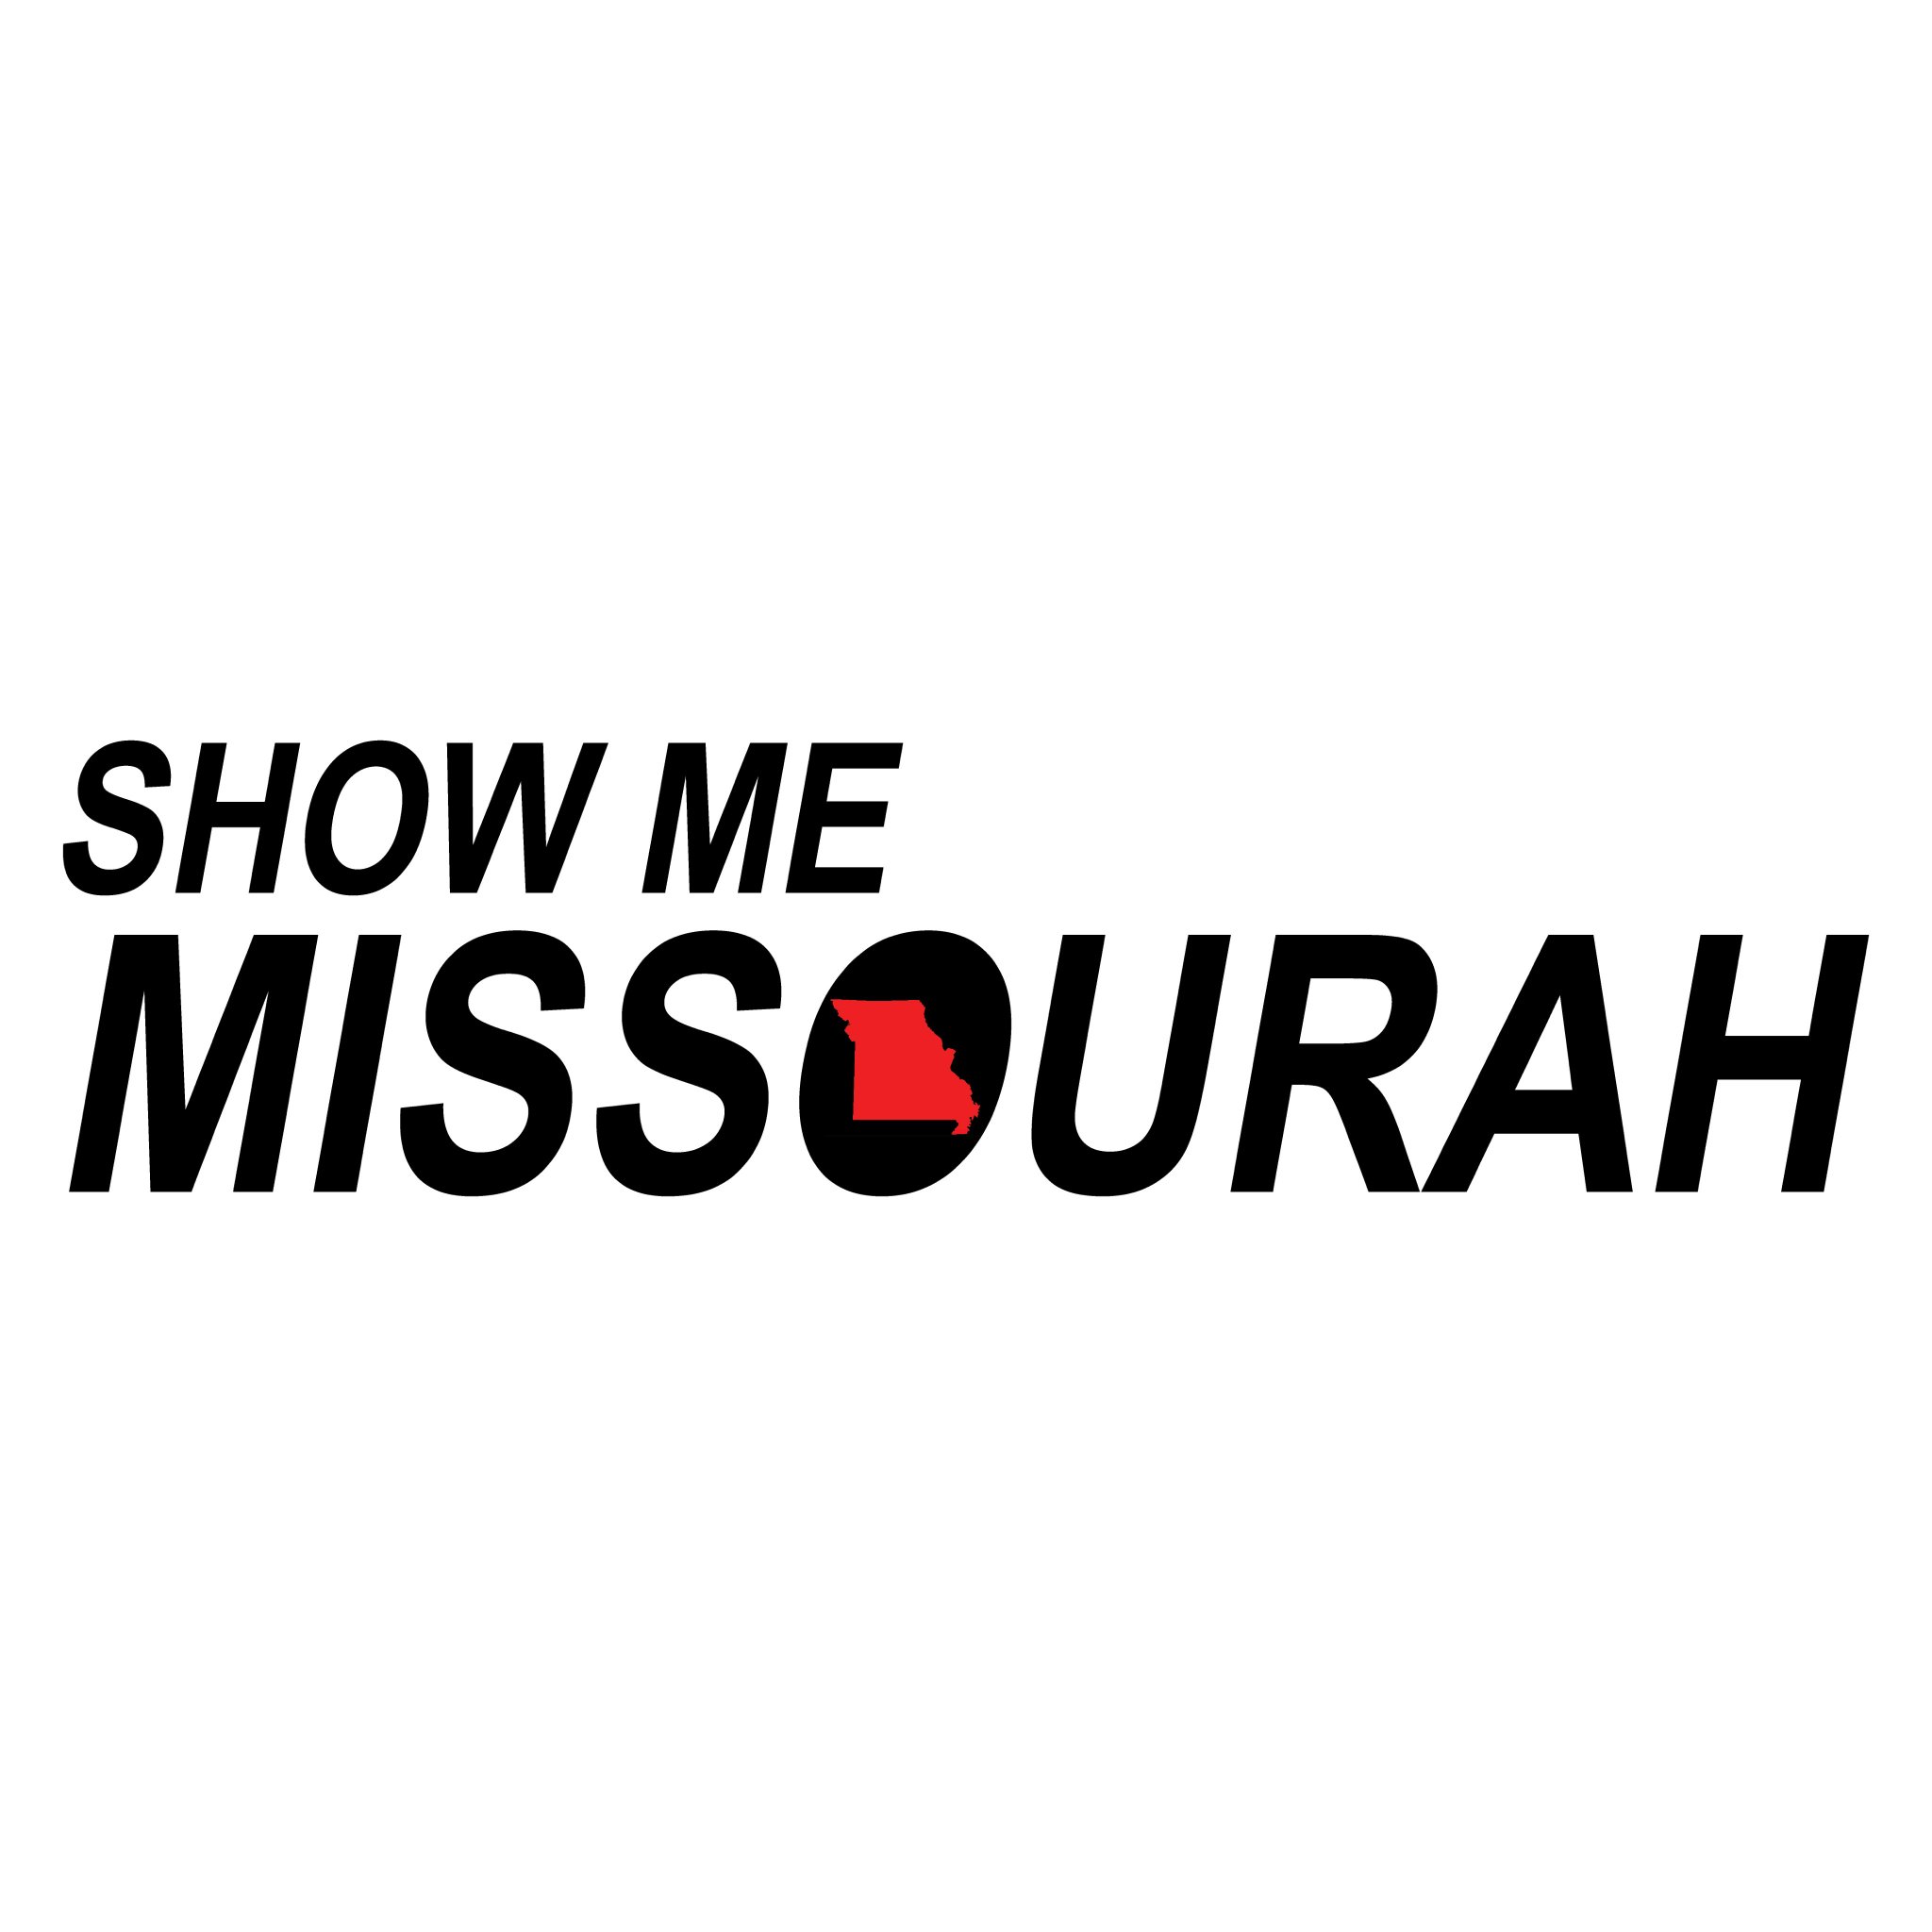 The history of Missouri one county at a time.